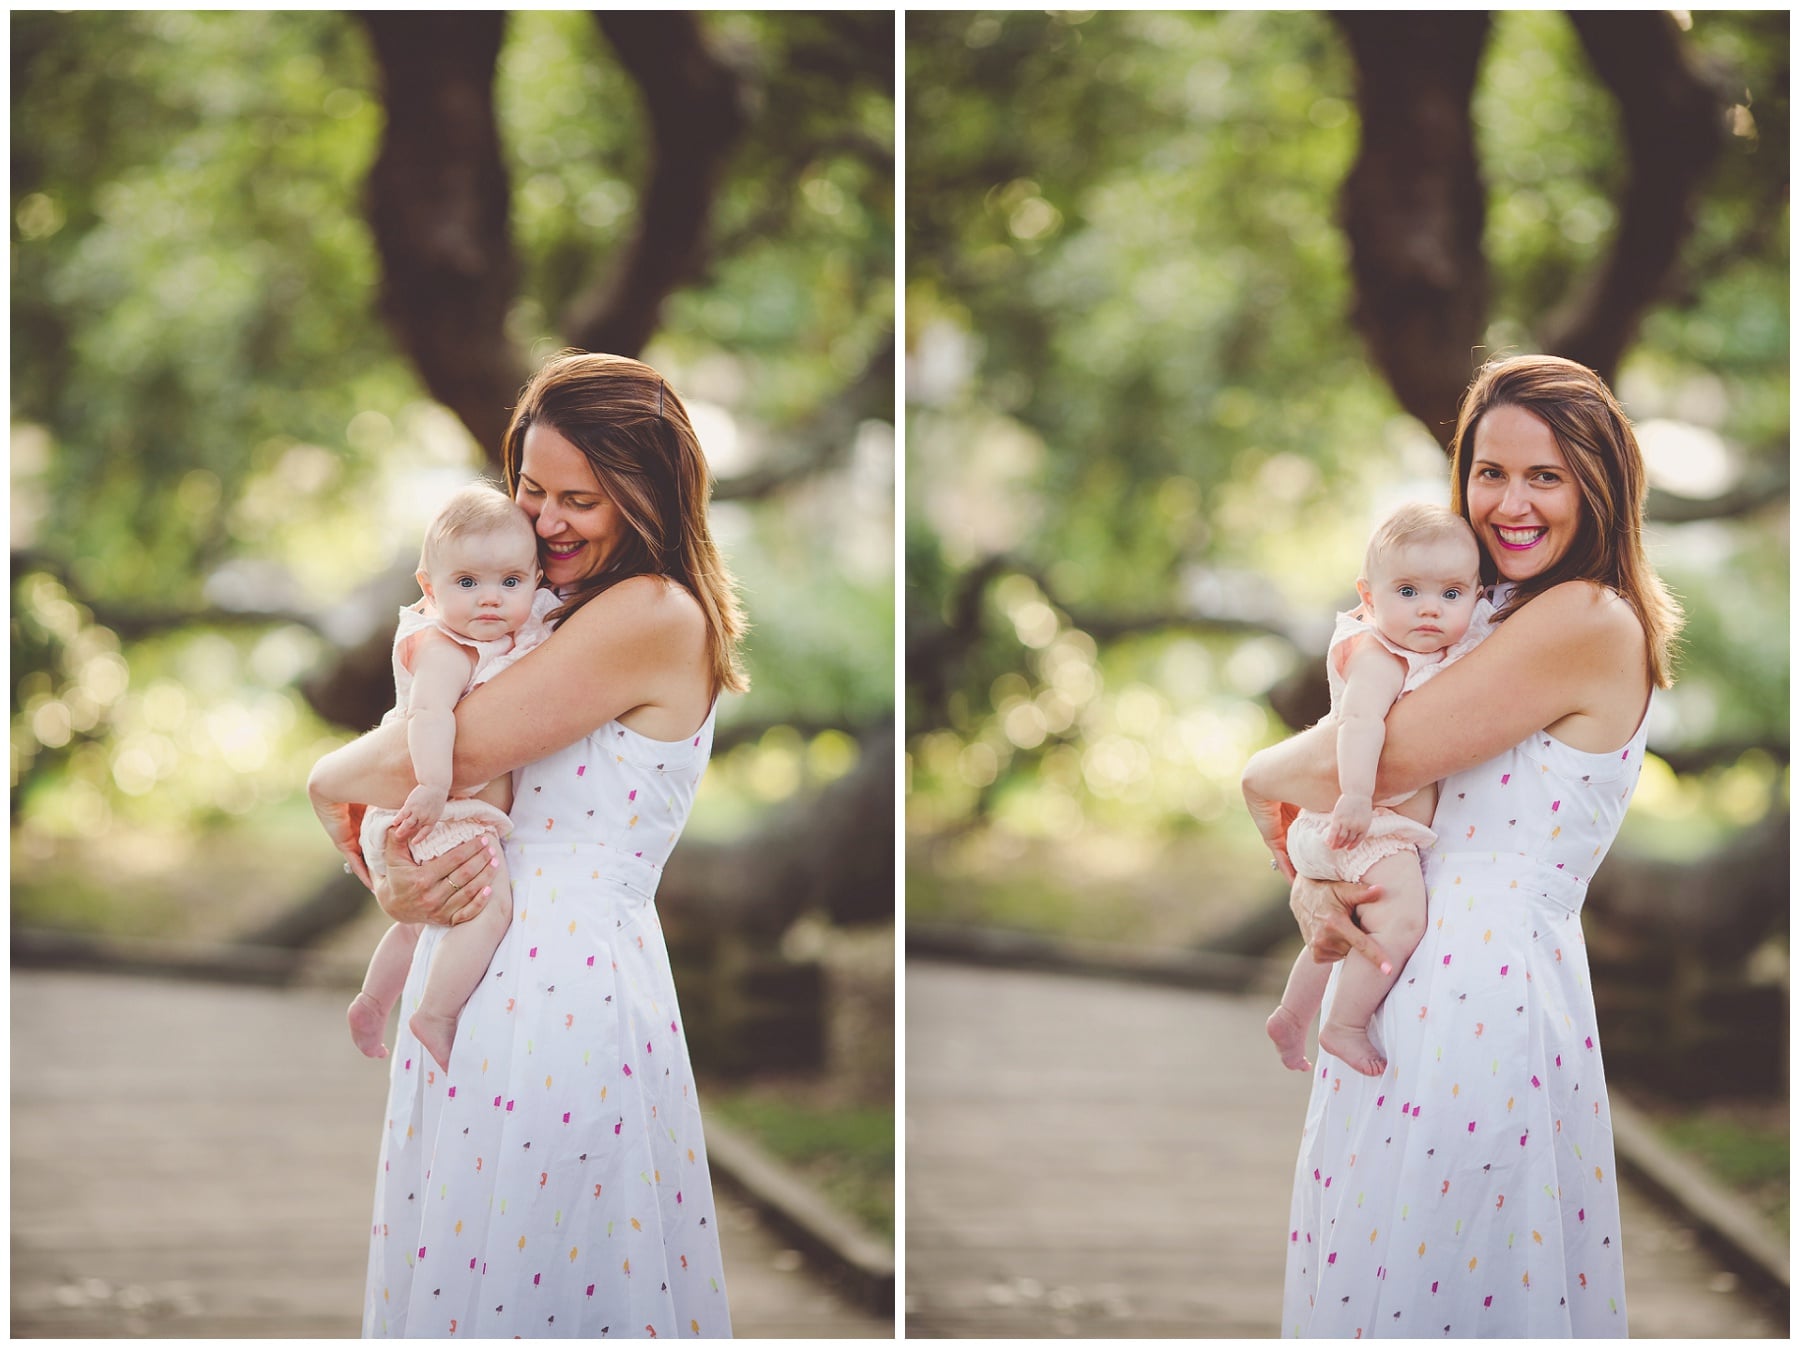 Beautiful mom and daughter photo session www.808photographyjax.com